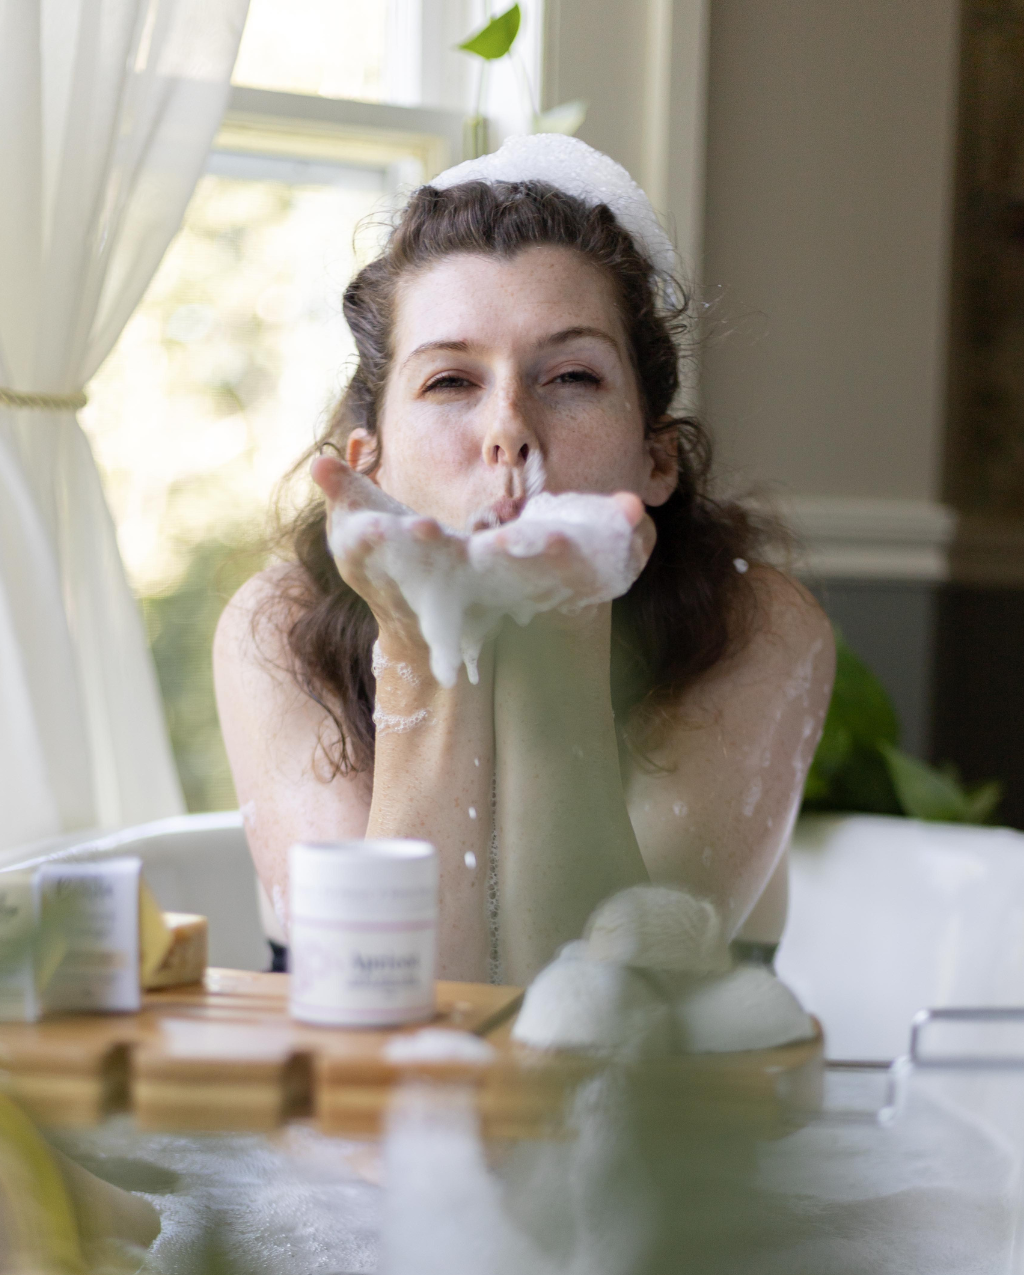 Bubbles & Balms zero-waste bubble bath for dry & sensitive skin making big bubbles in tub and safe enough for face to get close and blow bubble kisses.